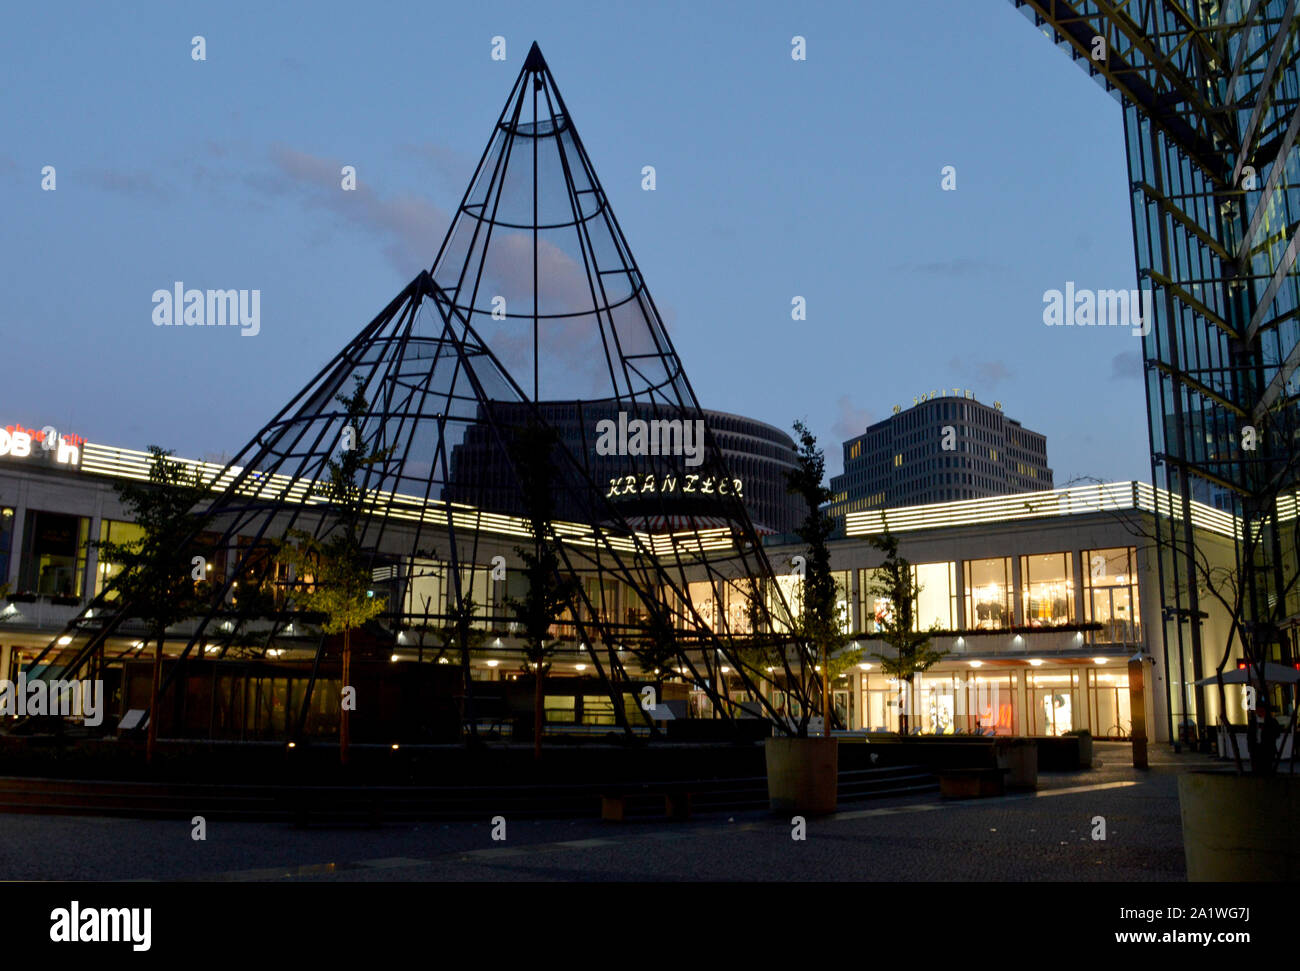 BERLIN, GERMANY - 18 SEPTEMBER 2019  The retail and office development Kranzler Eck is built behind the famous Cafe Kranzler to a design by Helmut Jah Stock Photo